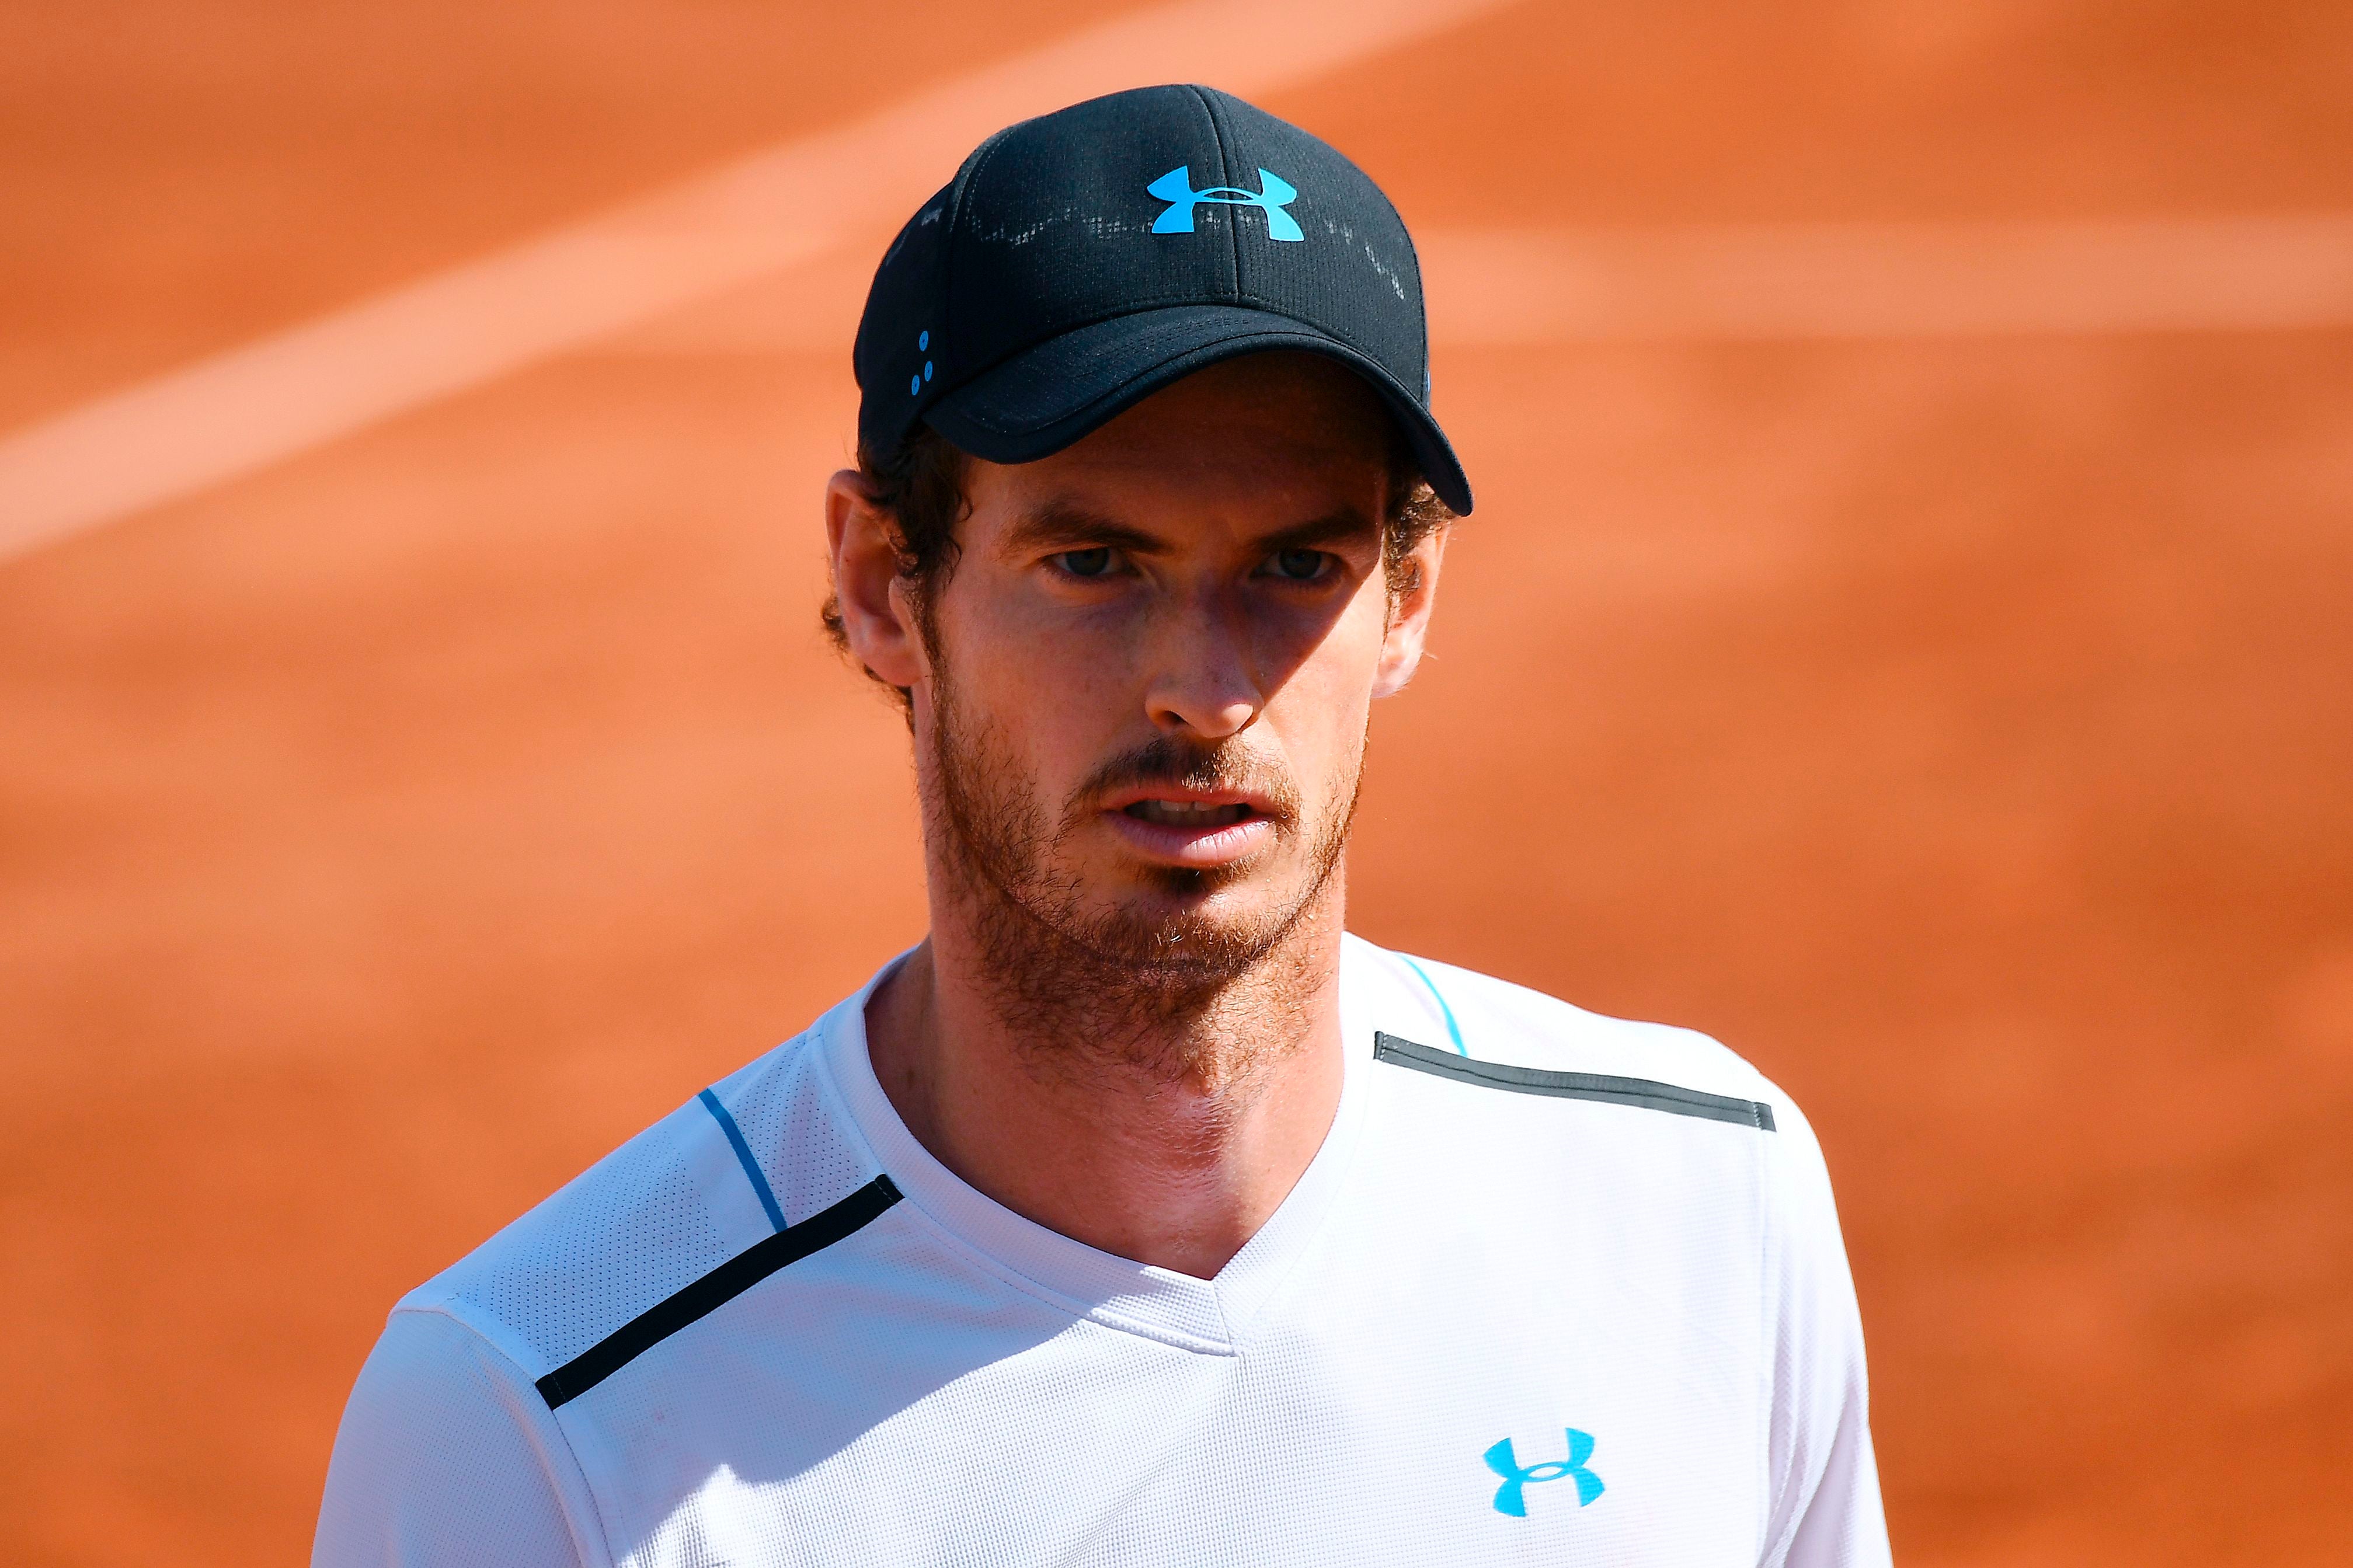 Andy Murray is set to skip the clay court season